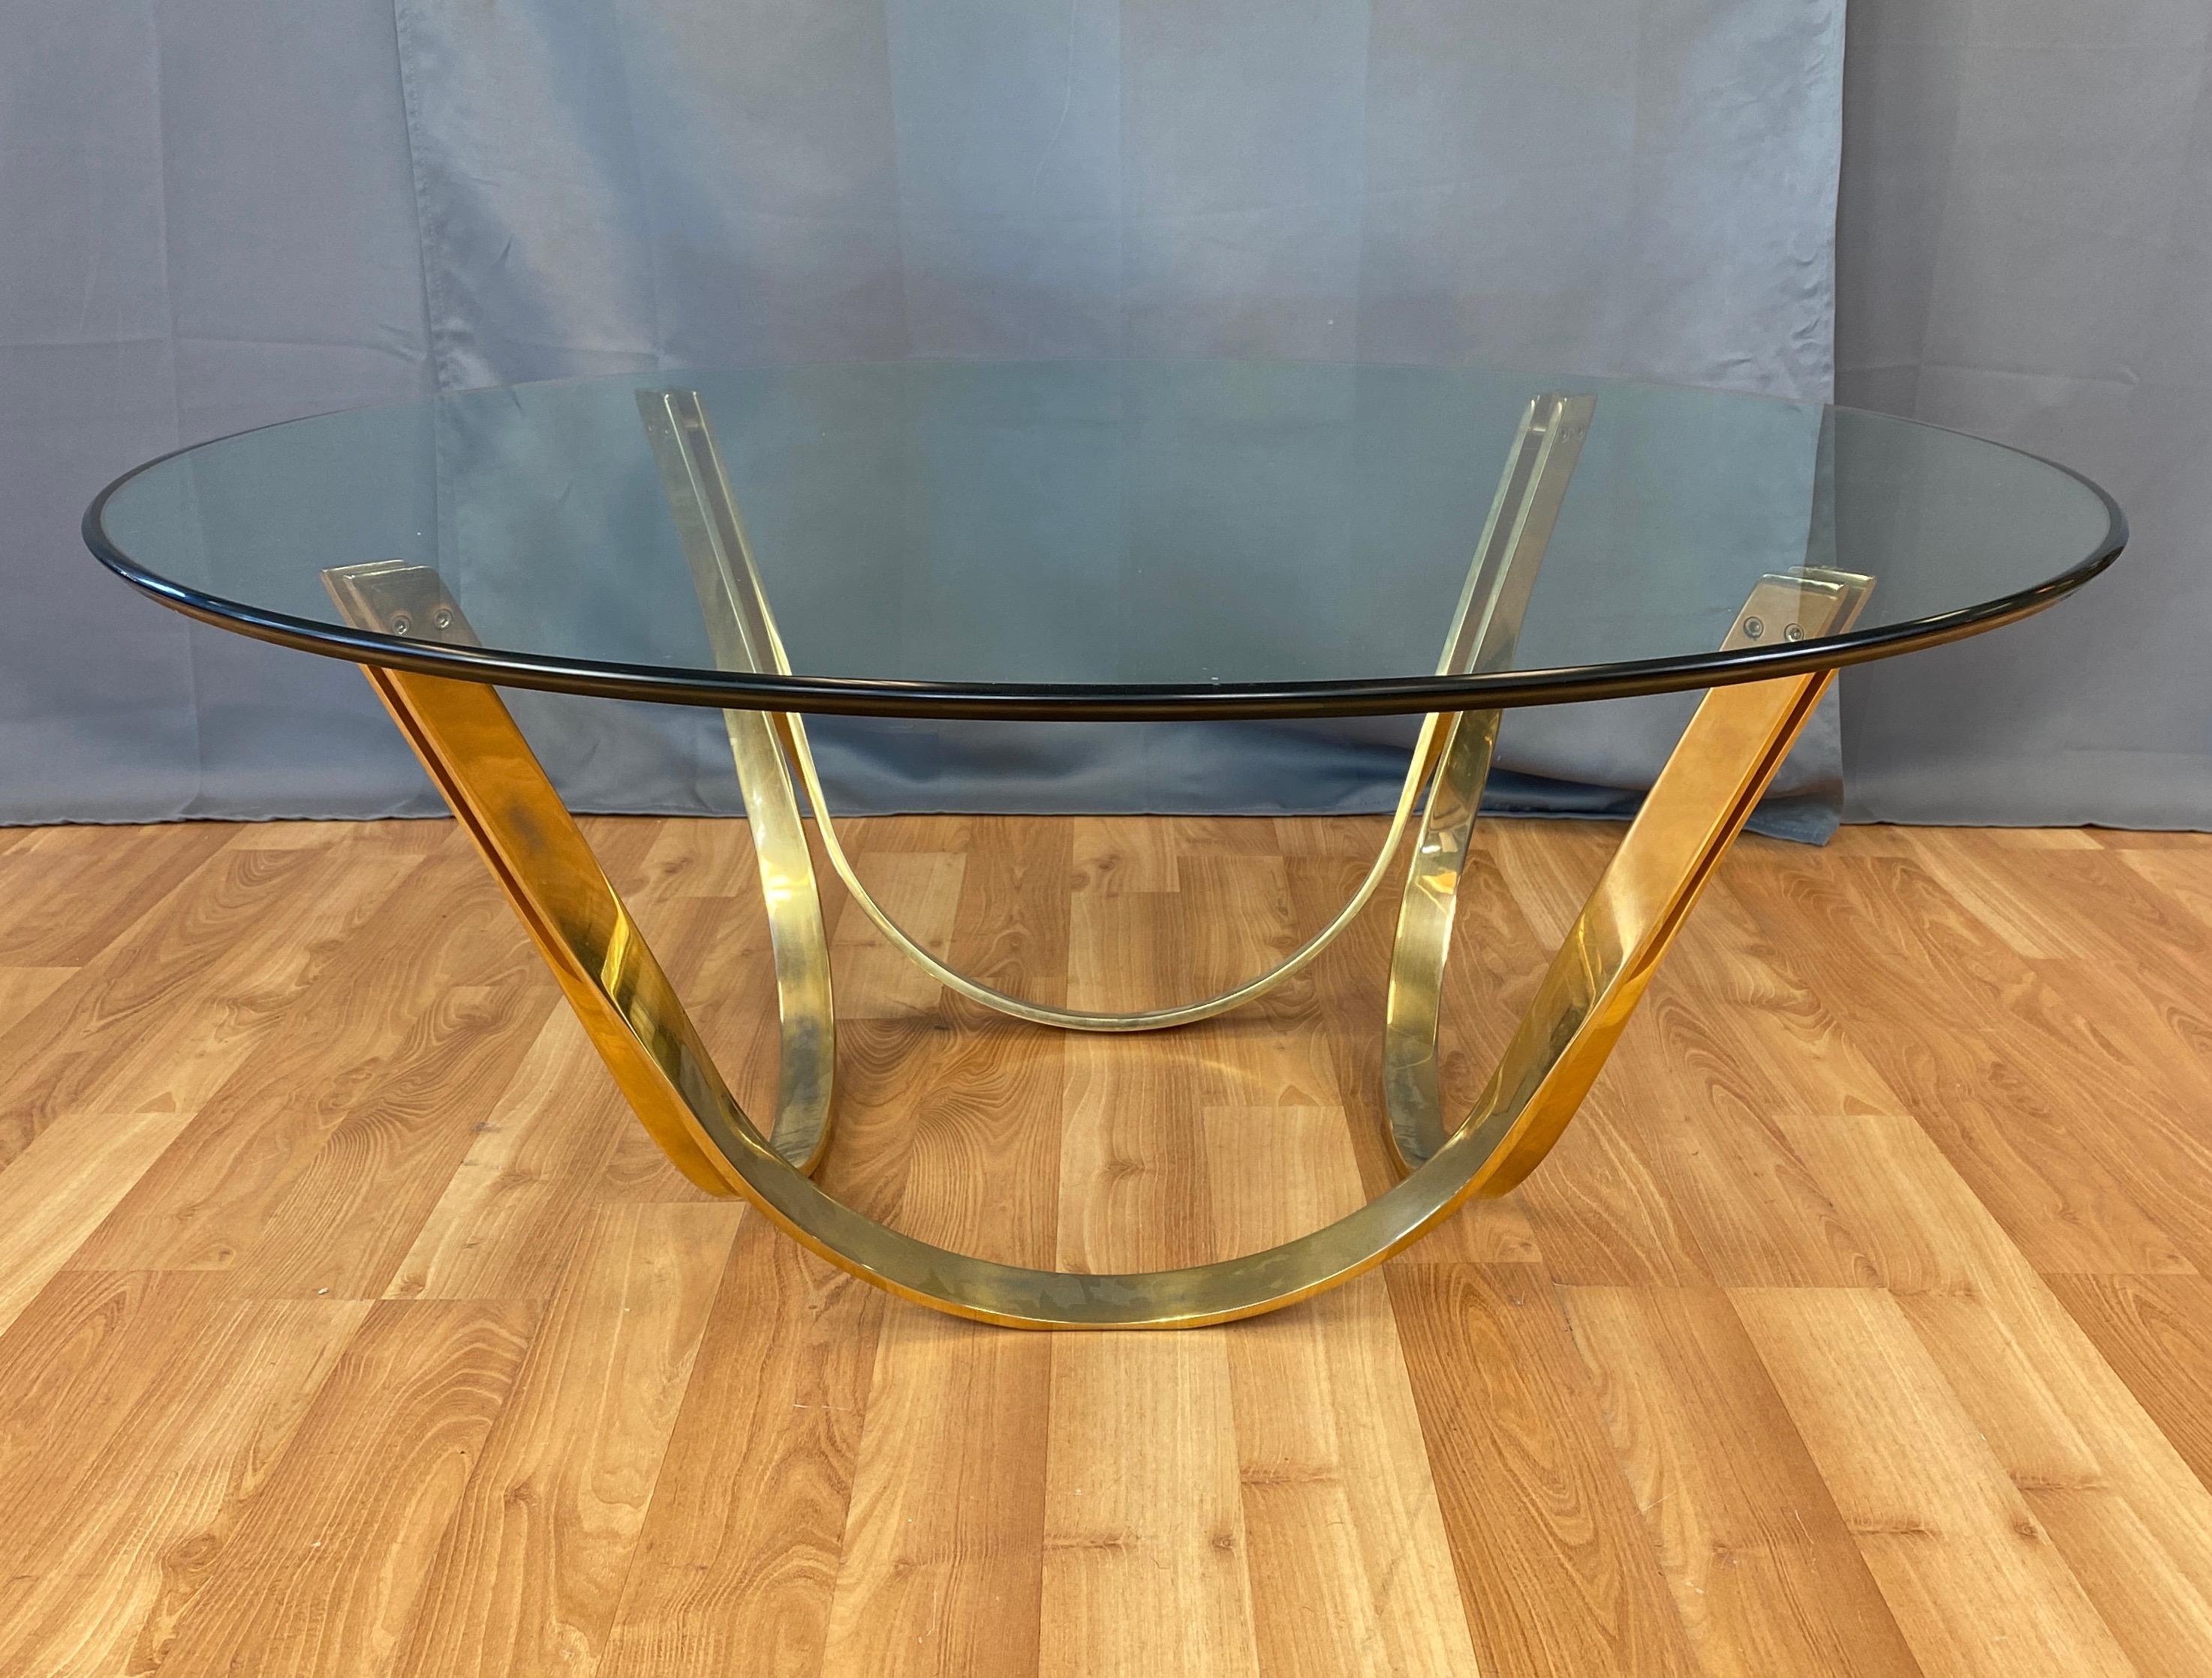 A 1970s brass-plated steel and glass top round coffee table by TriMark, done in the style of Roger Lee Sprunger for Dunbar Furniture.

Handsomely executed base comprised of four brass finish flat bar steel ribbons that elegantly curve, twist, and